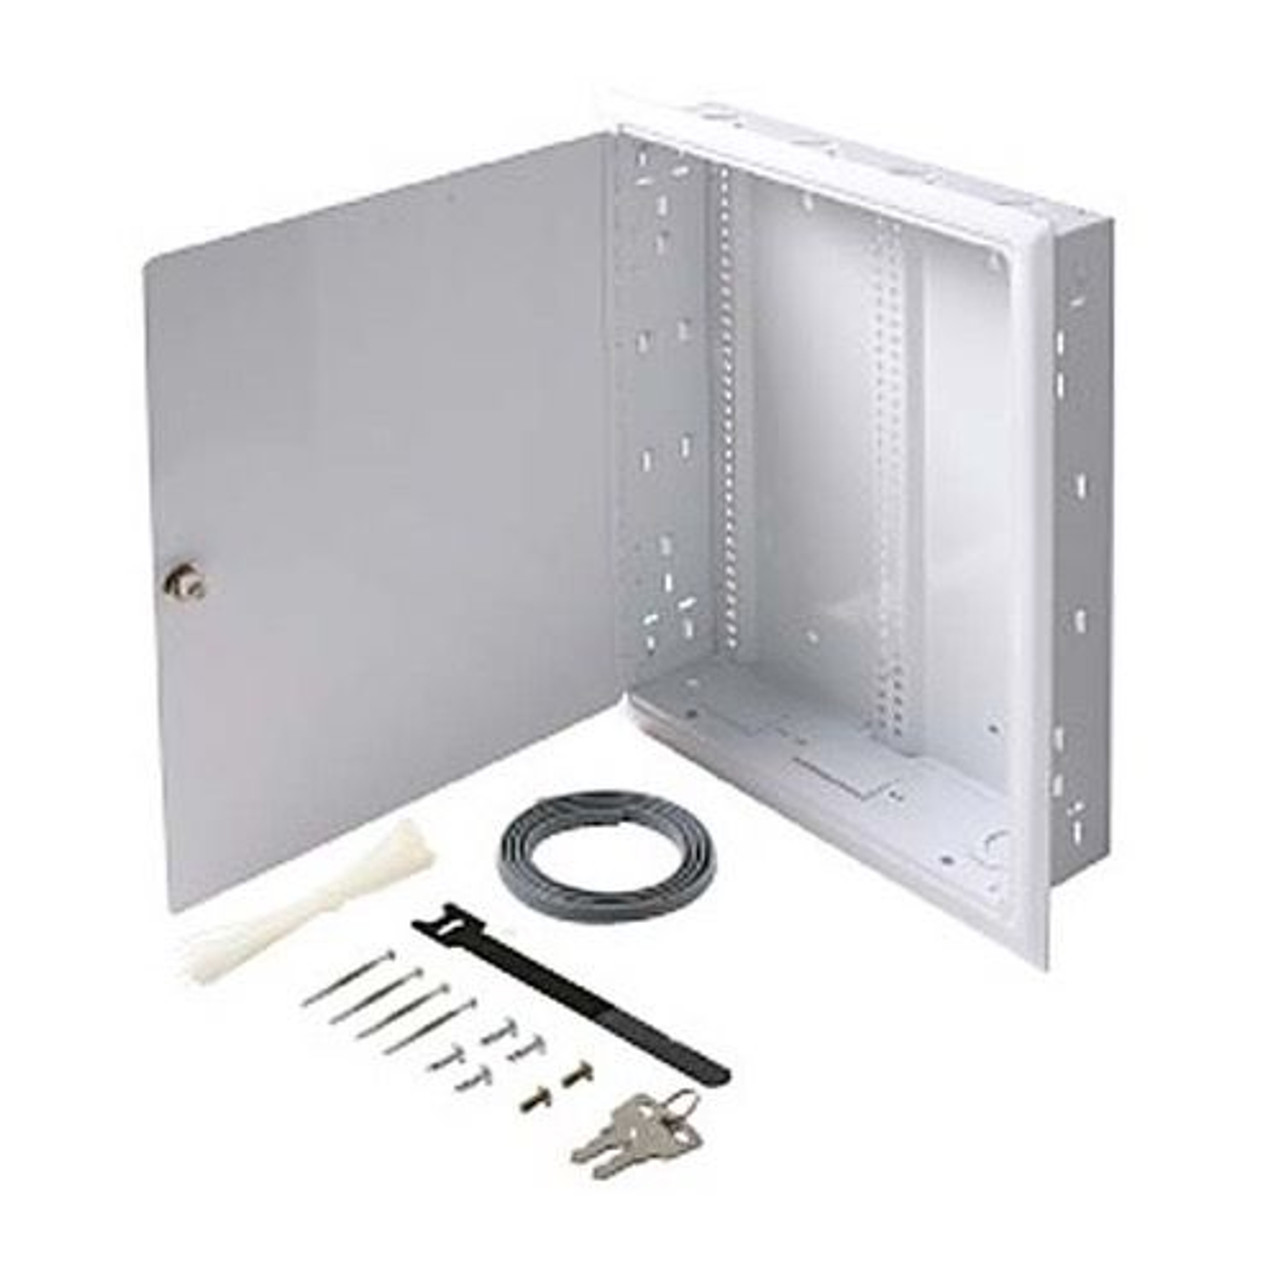 Eagle Flush Mount Enclosure 19" Inch with Cover 14 3/8" Inch W x 3 1/2" Inch D 18 Gauge Steel Keyed Latch Home Audio Video Distribution Hub Box 16" On Center White Finish FastHome Home Master Hub Junction Box